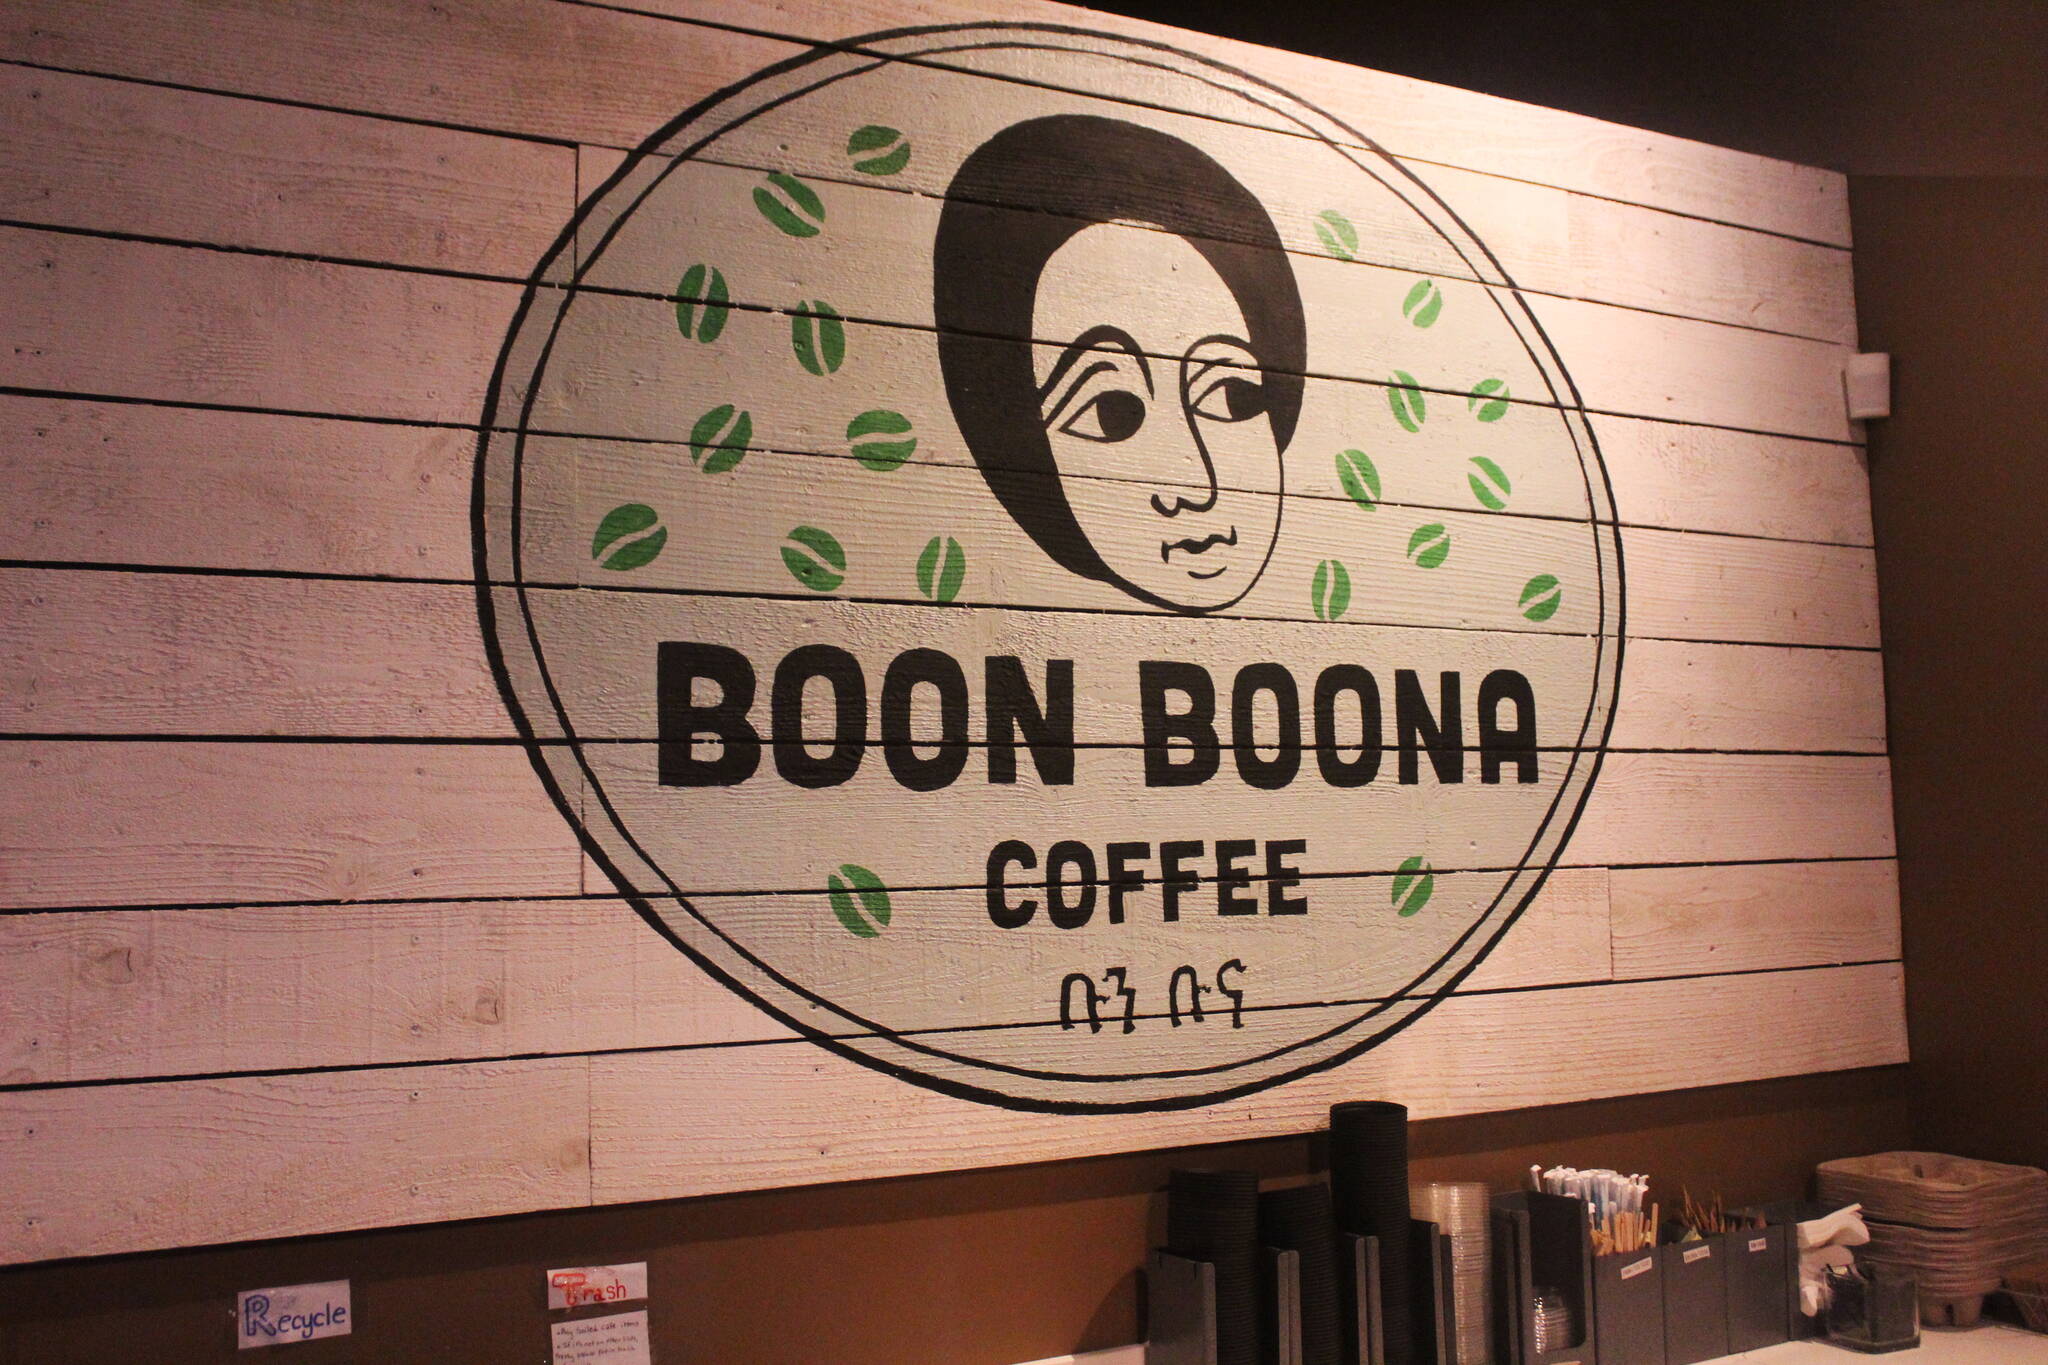 Boon Boona Coffee opened in Renton in 2019. (Photo by Bailey Jo Josie/Sound Publishing)